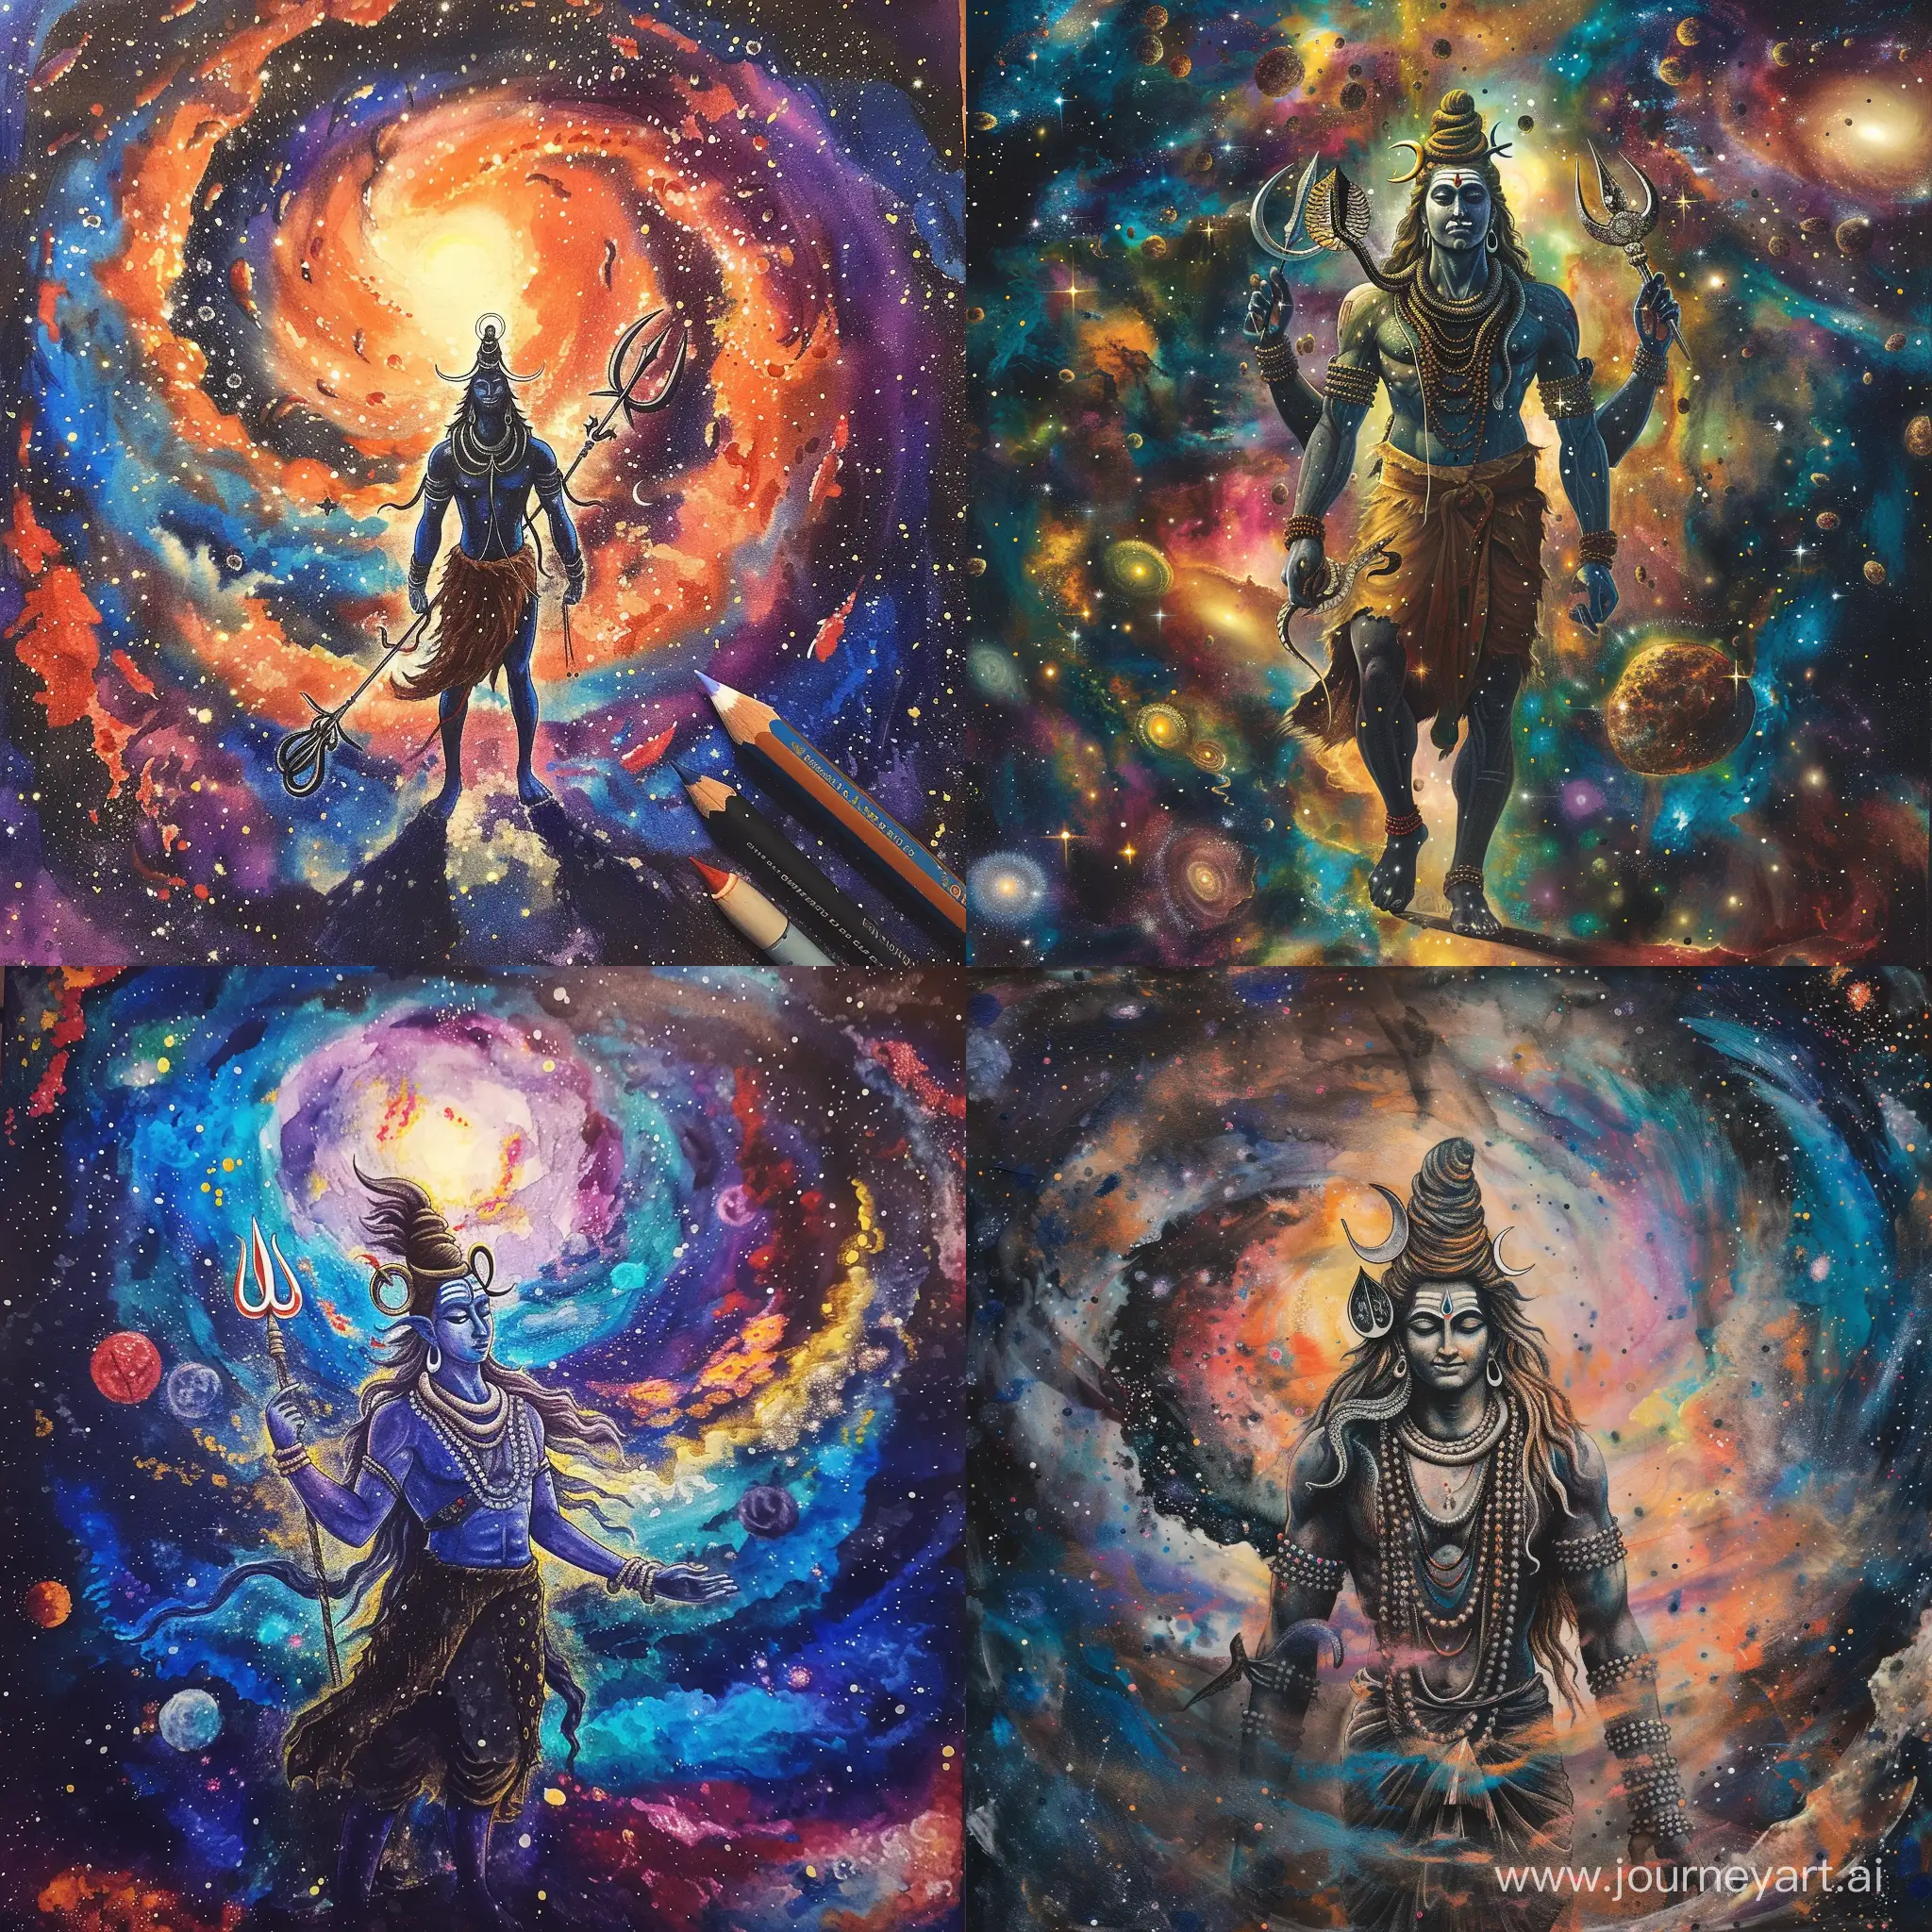 unrealistic imagination of Shiva standing in the cosmos full of vivid galaxies with their trishul and don't draw face